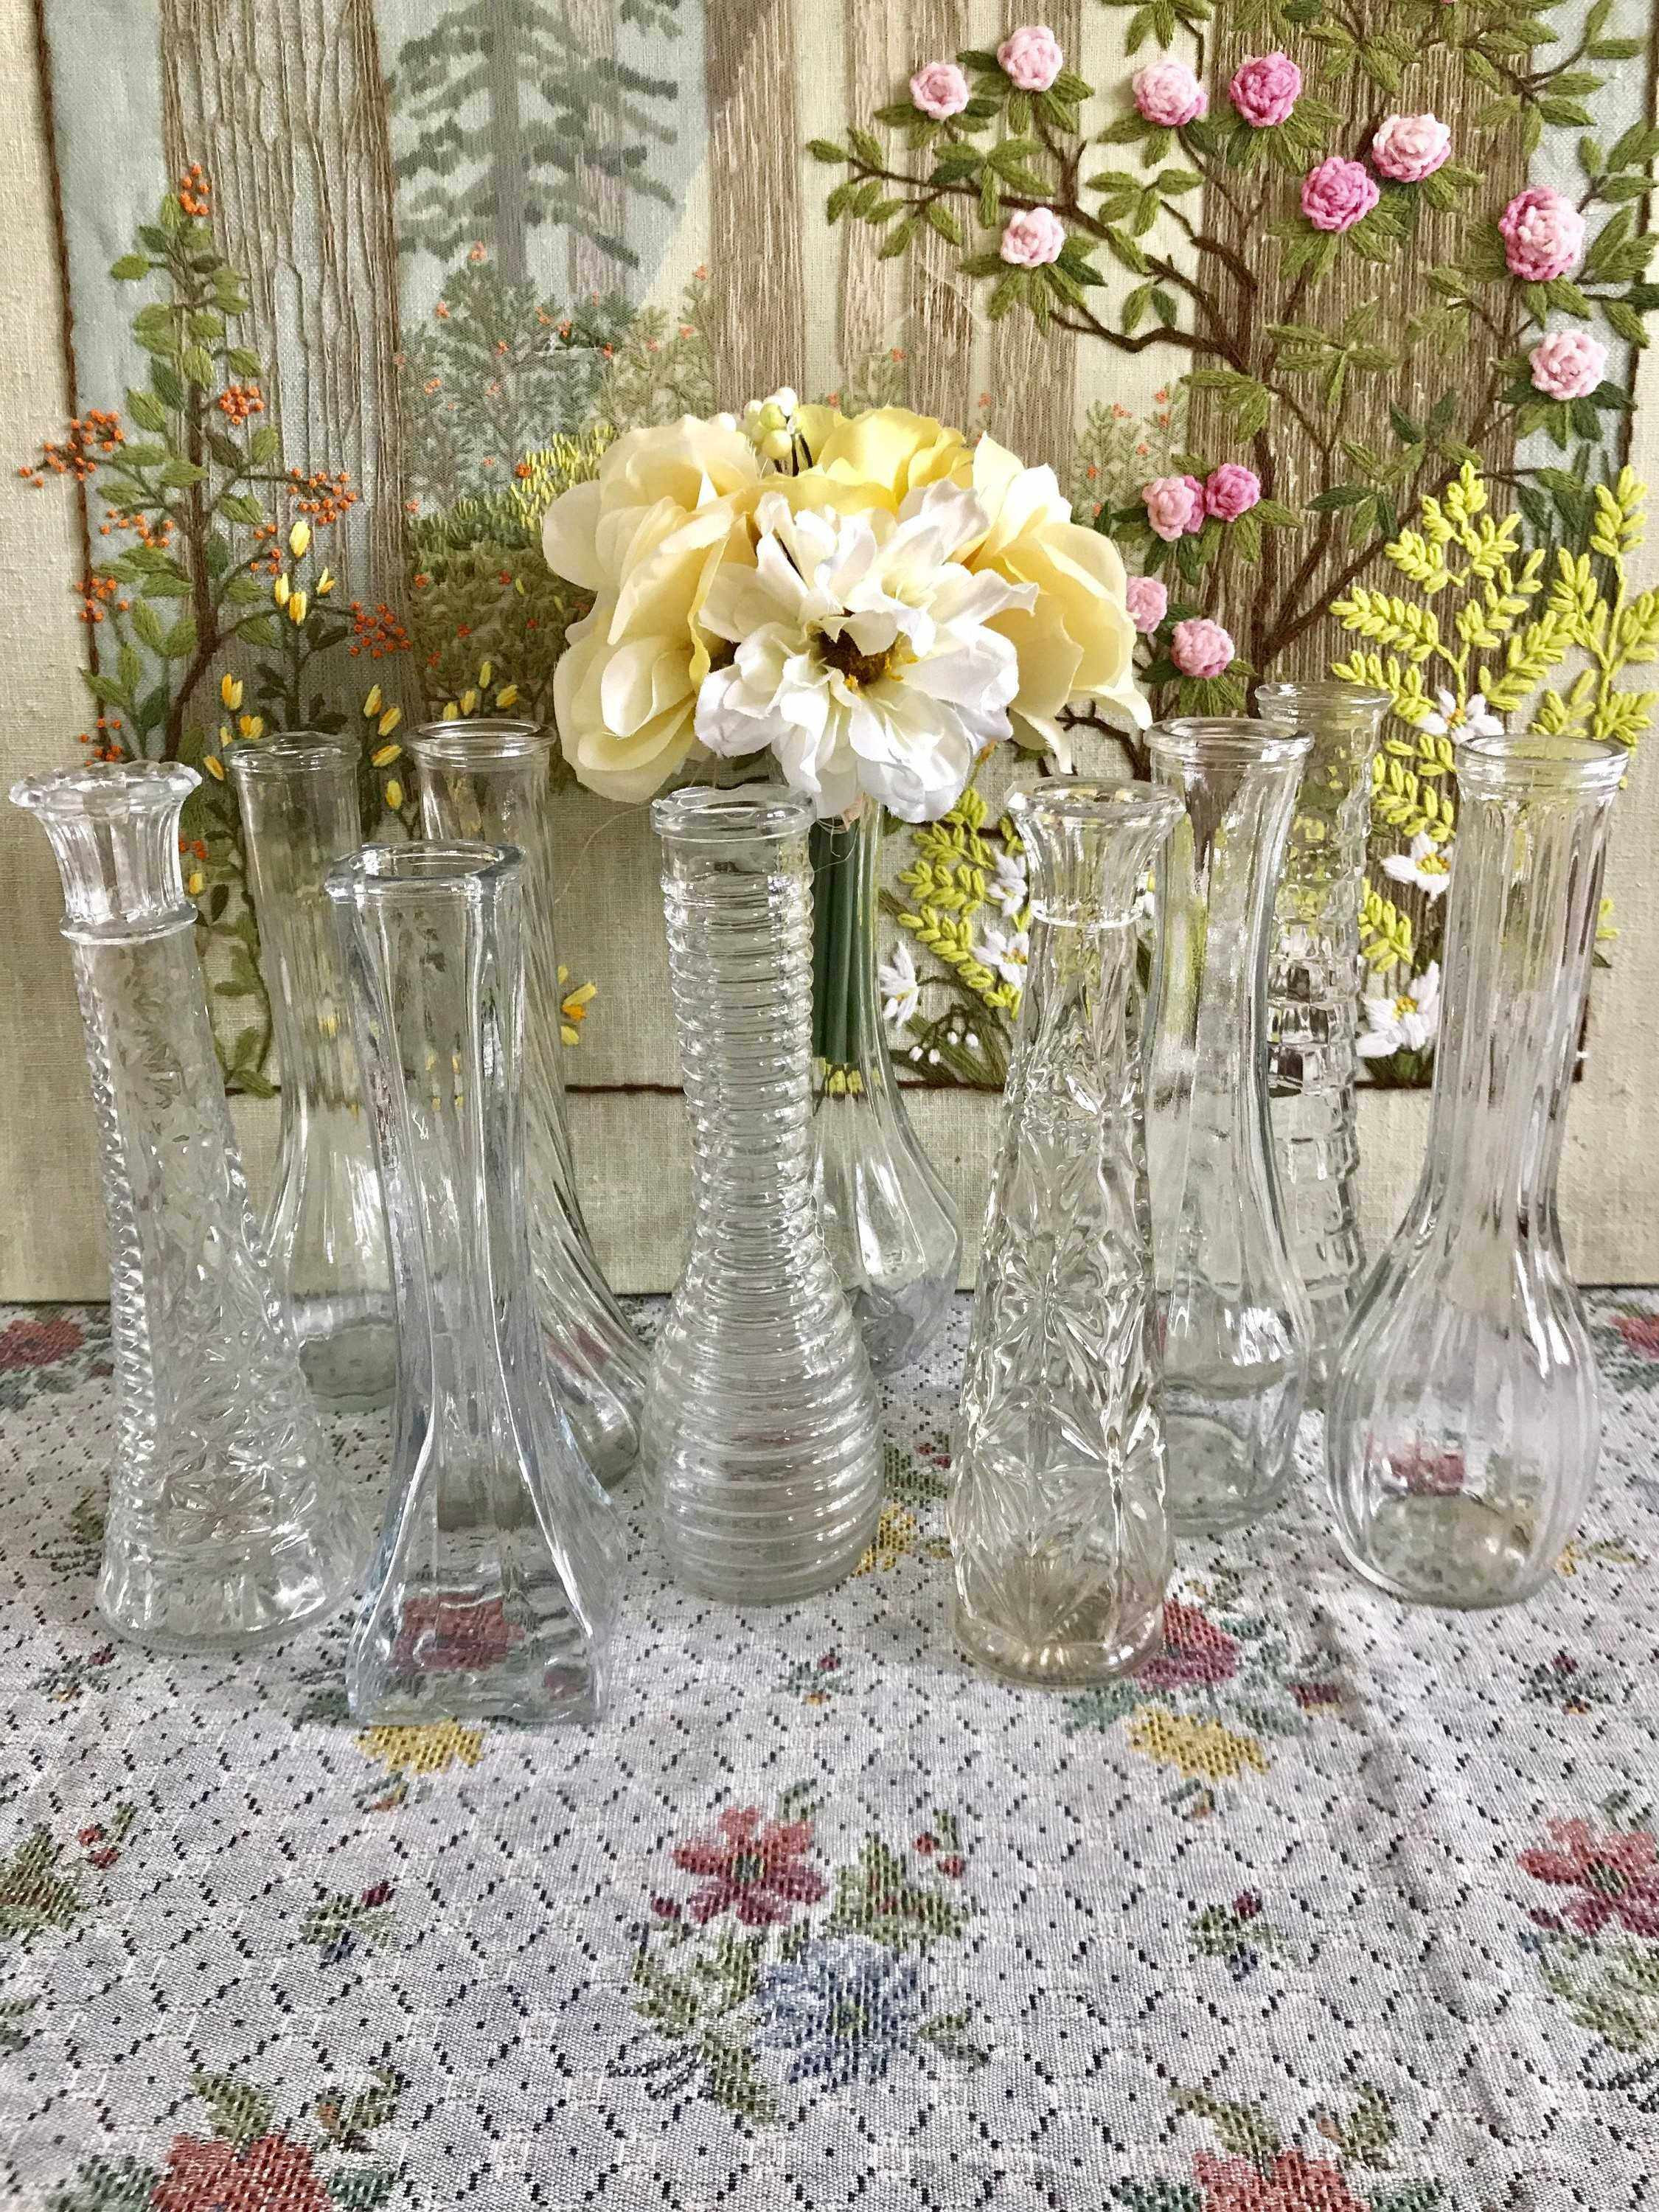 12 Recommended Small Vases for Wedding Centerpieces 2024 free download small vases for wedding centerpieces of cheap wedding decorations for tables awesome living room vases throughout cheap wedding decorations for tables awesome living room vases wedding inspi